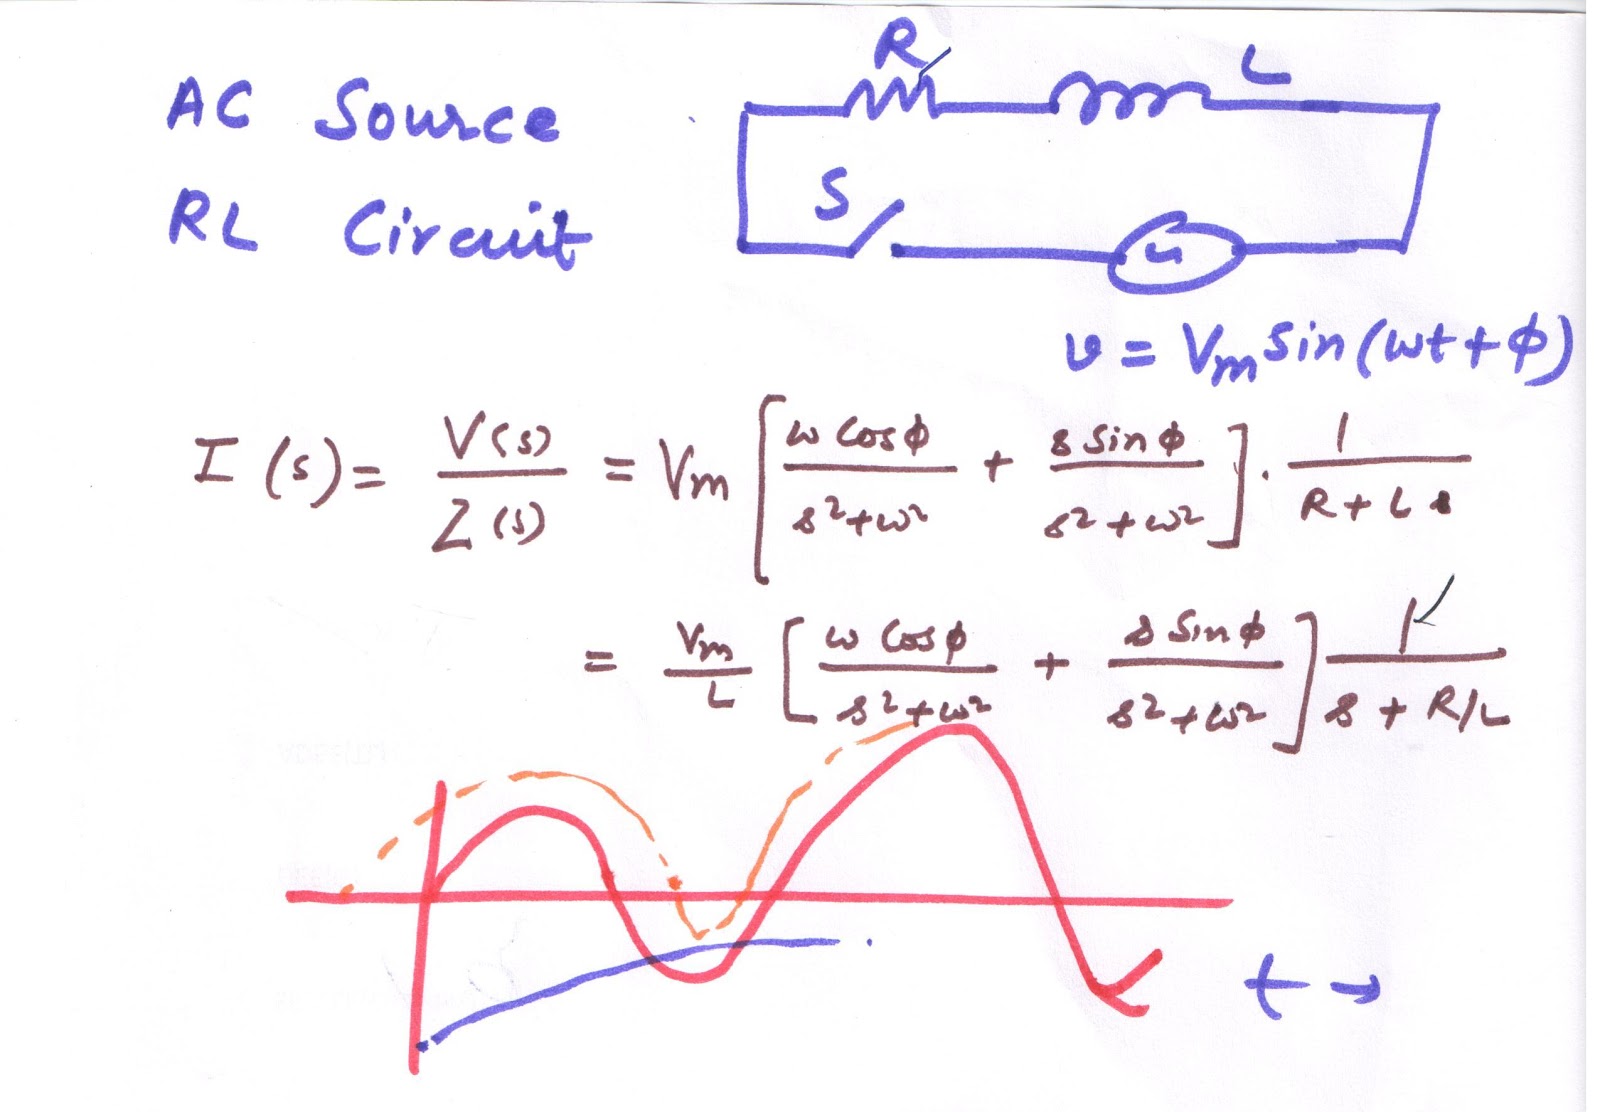 ELECTRICAL ENGINEERING: RL circuit on a AC source.